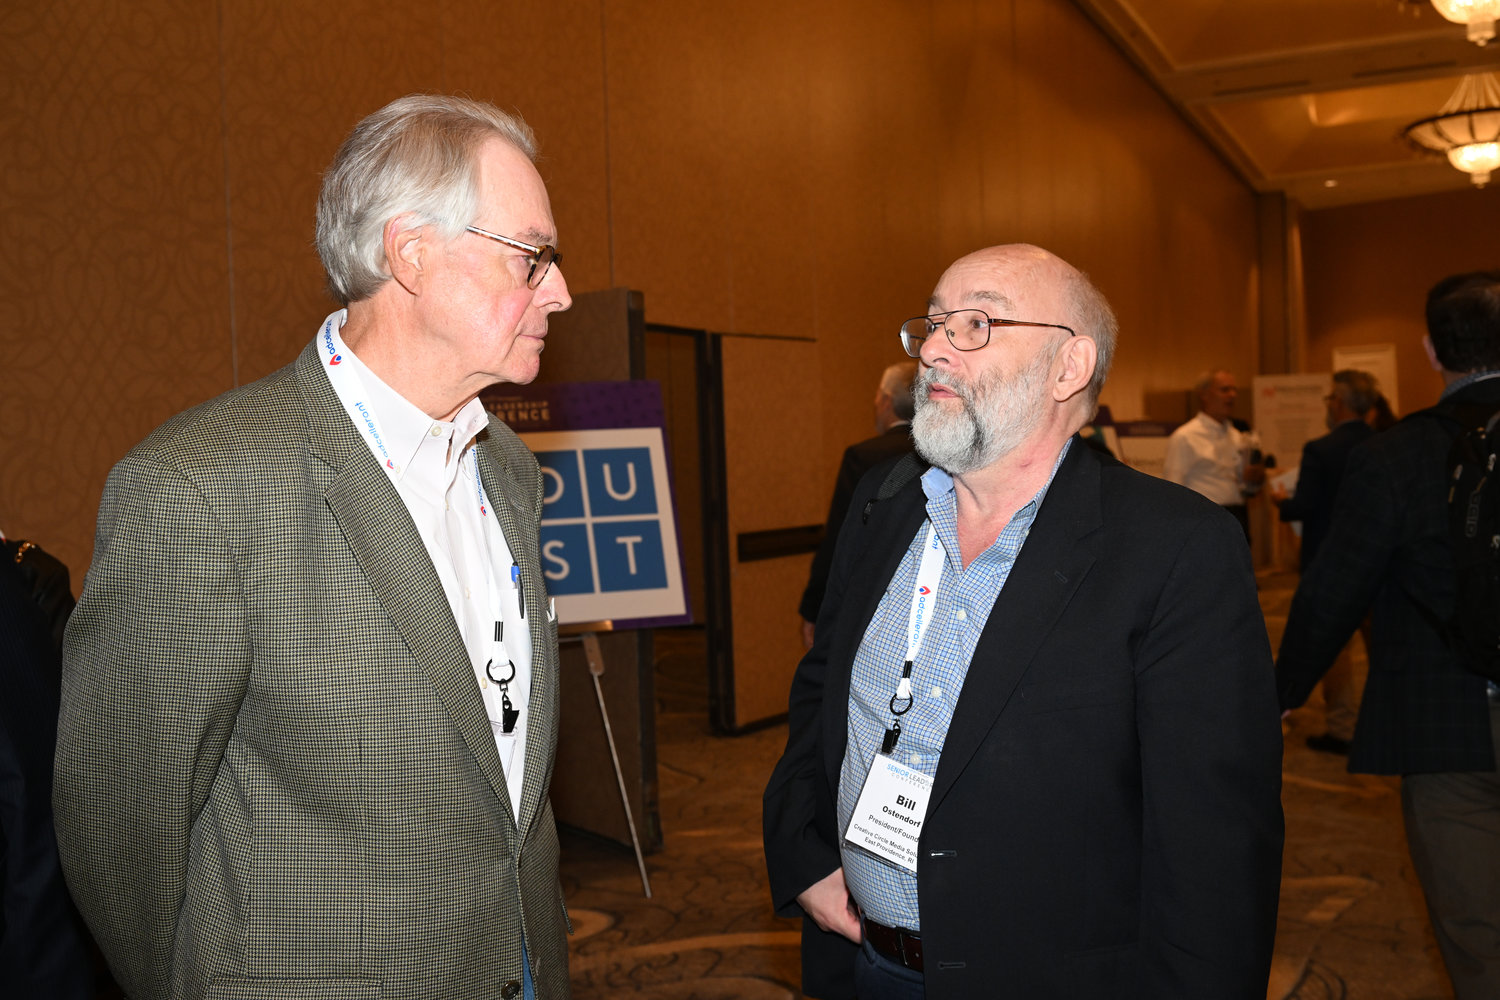 Tom Slaughter, executive director of the Inland Press Foundation, and Bill Ostendorf, president and founder of Creative Circle Media Solutions. (Photo by Jeff Strout)